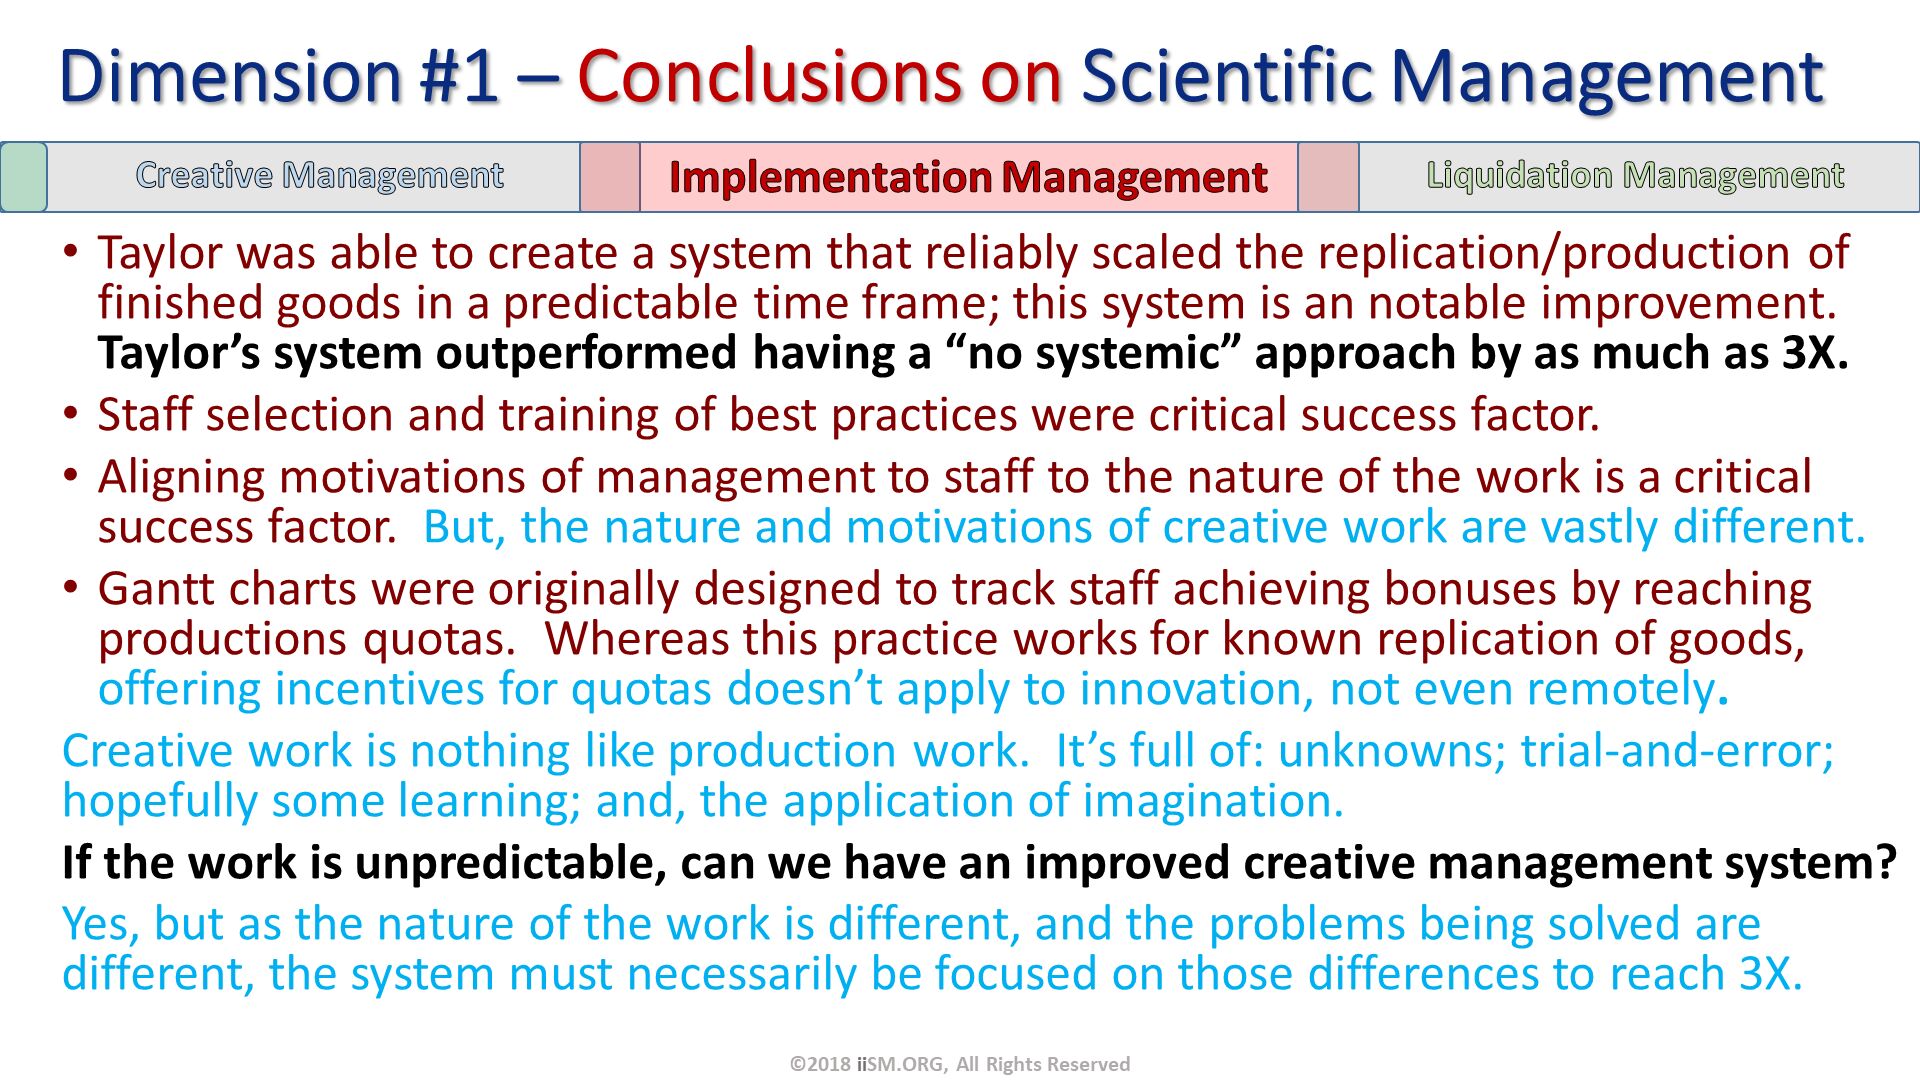 Taylor was able to create a system that reliably scaled the replication/production of finished goods in a predictable time frame; this system is an notable improvement.  Taylor’s system outperformed having a “no systemic” approach by as much as 3X.
Staff selection and training of best practices were critical success factor.
Aligning motivations of management to staff to the nature of the work is a critical success factor.  But, the nature and motivations of creative work are vastly different.
Gantt charts were originally designed to track staff achieving bonuses by reaching productions quotas.  Whereas this practice works for known replication of goods, offering incentives for quotas doesn’t apply to innovation, not even remotely.
Creative work is nothing like production work.  It’s full of: unknowns; trial-and-error; hopefully some learning; and, the application of imagination. 
If the work is unpredictable, can we have an improved creative management system? 
Yes, but as the nature of the work is different, and the problems being solved are different, the system must necessarily be focused on those differences to reach 3X. Dimension #1 – Conclusions on Scientific Management. ©2018 iiSM.ORG, All Rights Reserved. 